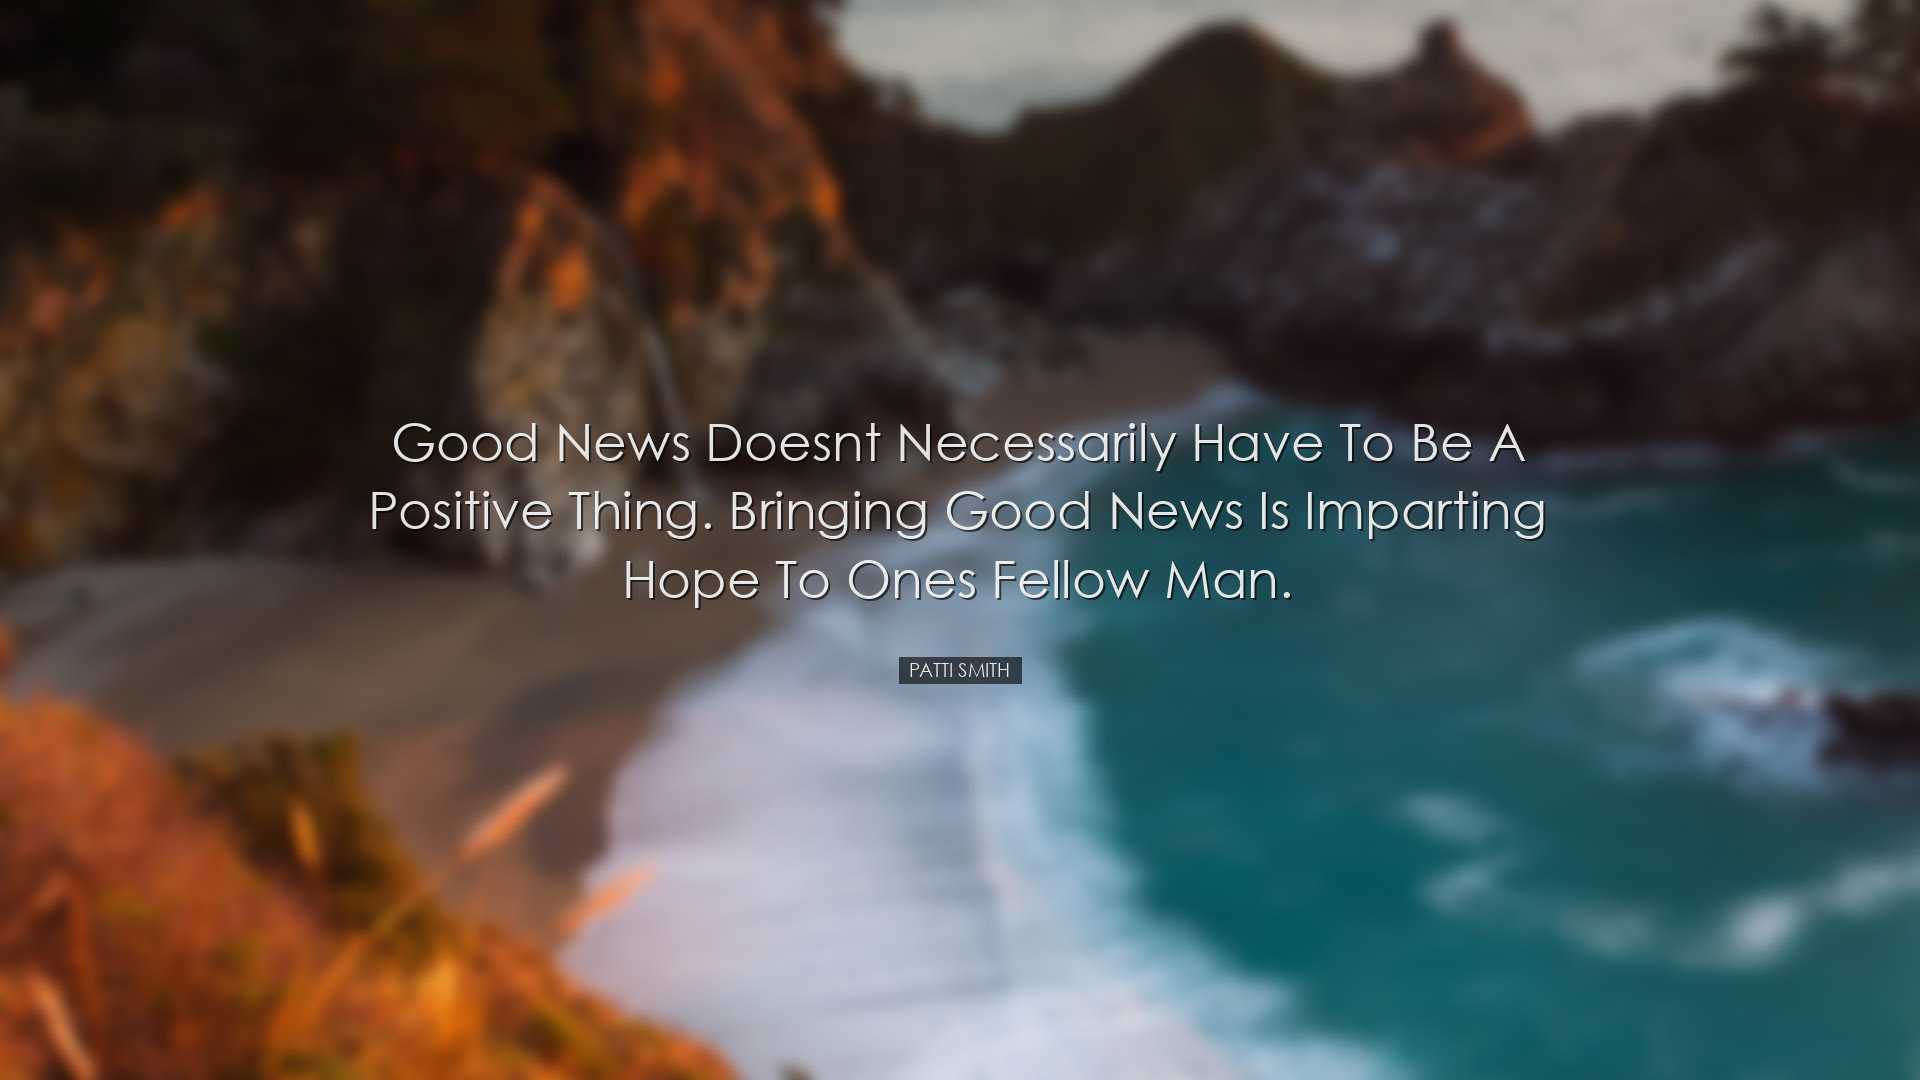 Good news doesnt necessarily have to be a positive thing. Bringing